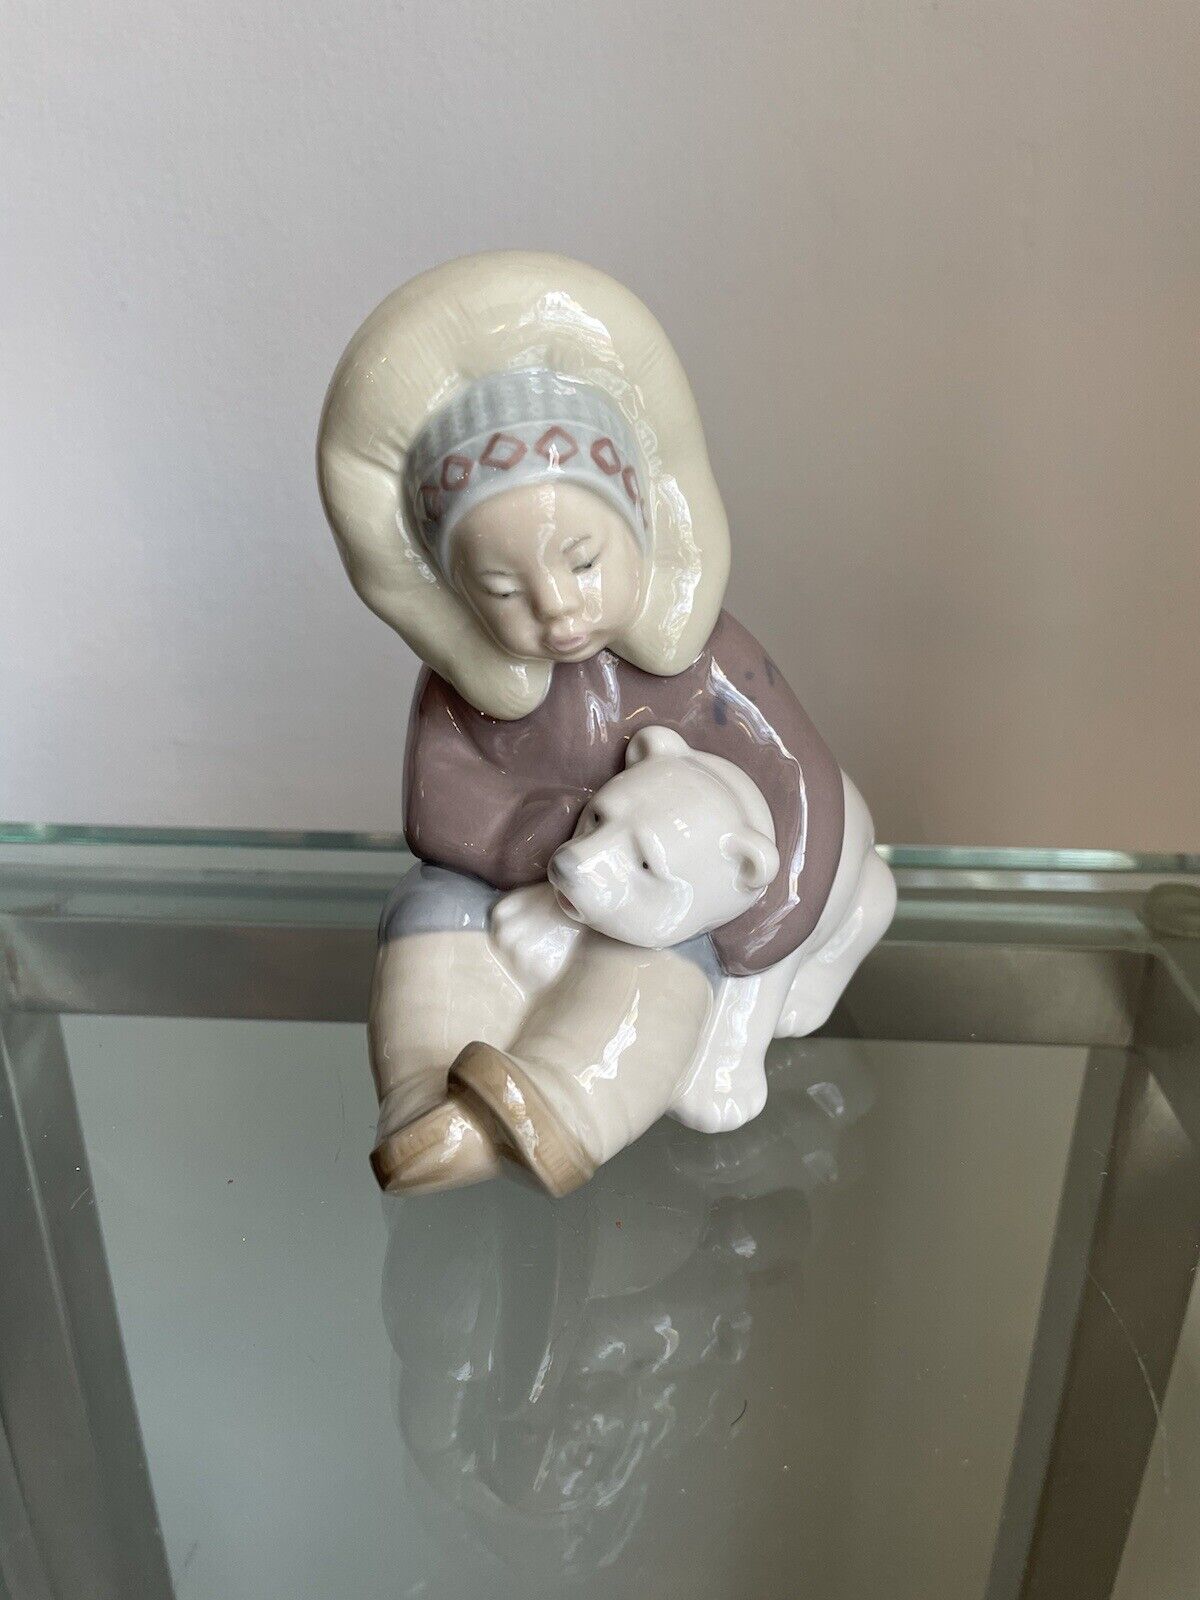 Lladro Collectible Figurine “Little Eskimo Playing With Polar Bear”